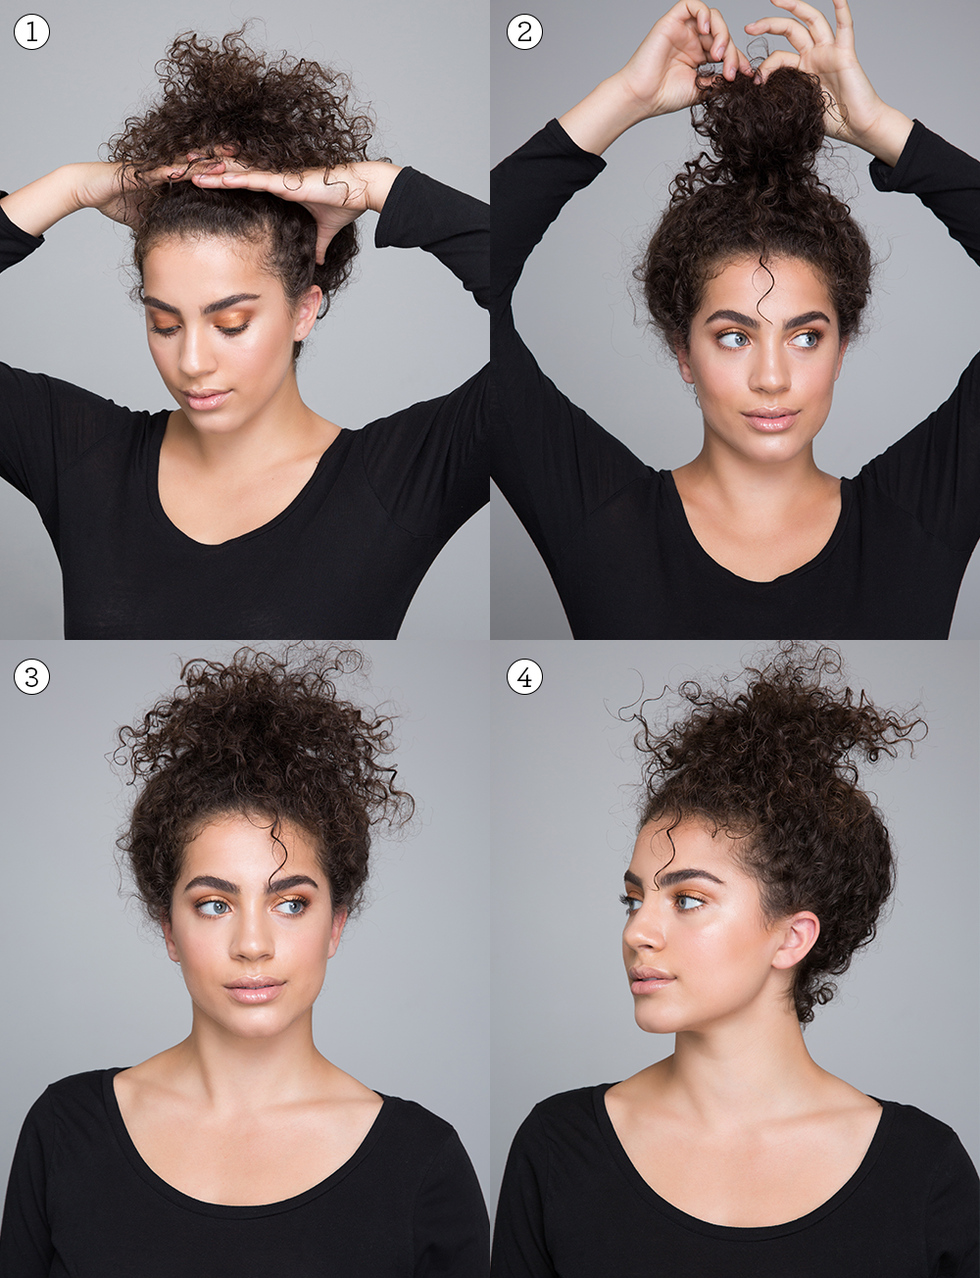 How to Wear Your Hair to Bed: 9 Tips to Protect Your Hair